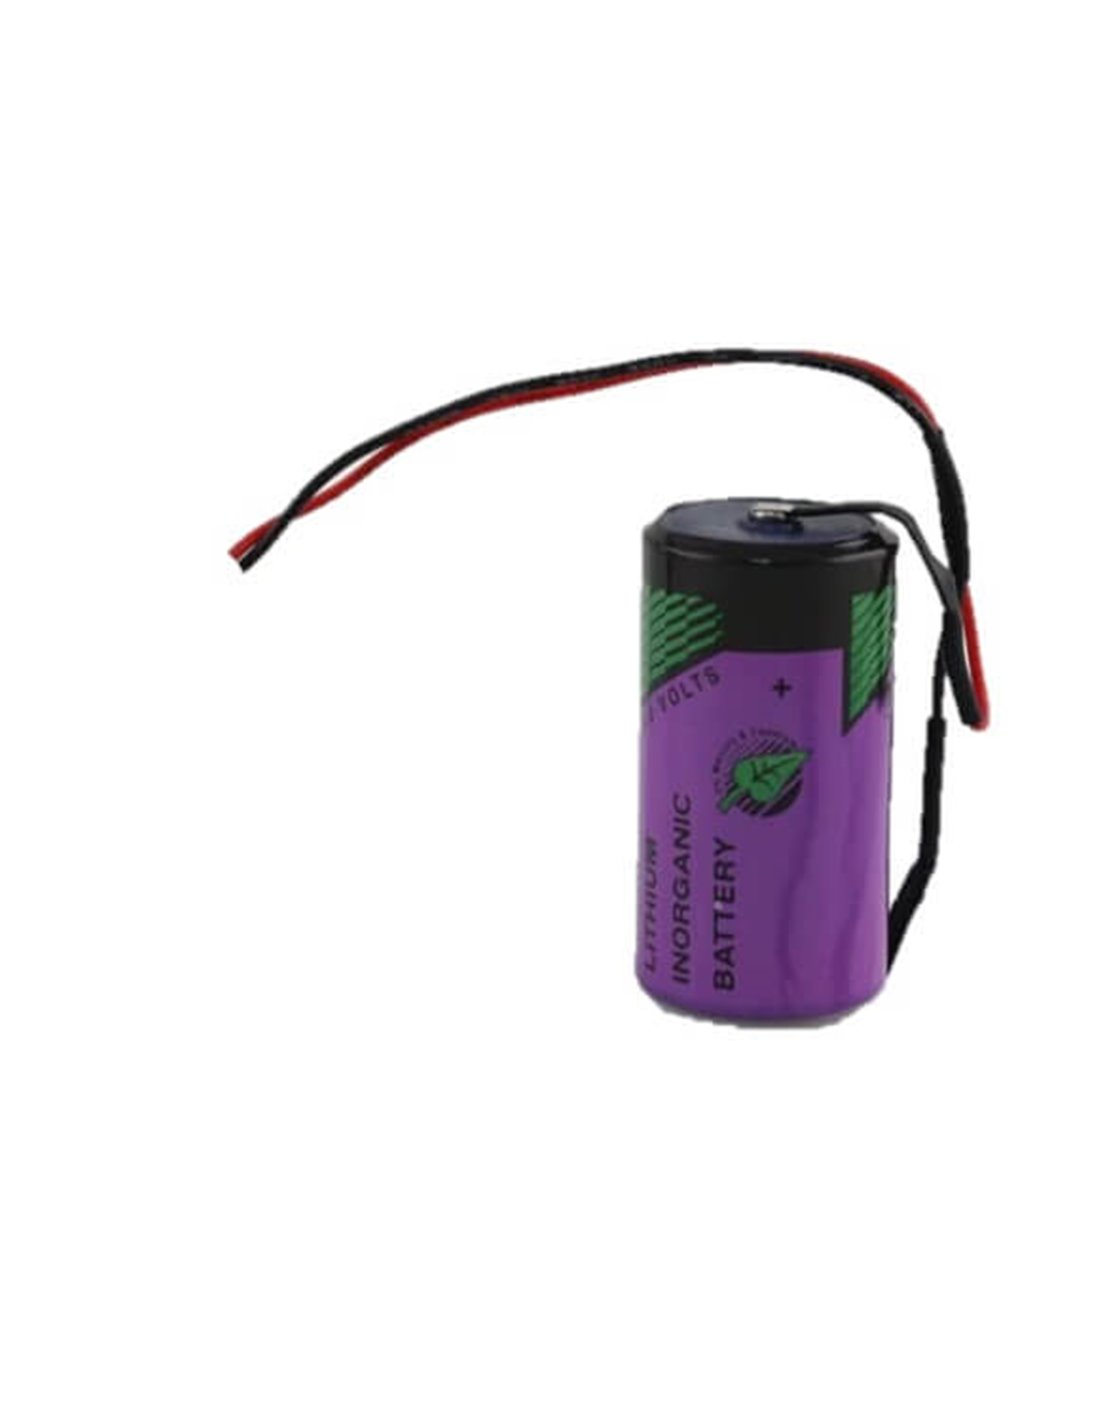 Tadiran TL-4930/S XOL Series 3.6V D Size 19Ah Lithium Battery replaces LSH20 & LS33600 3.6V - Non Rechargeable